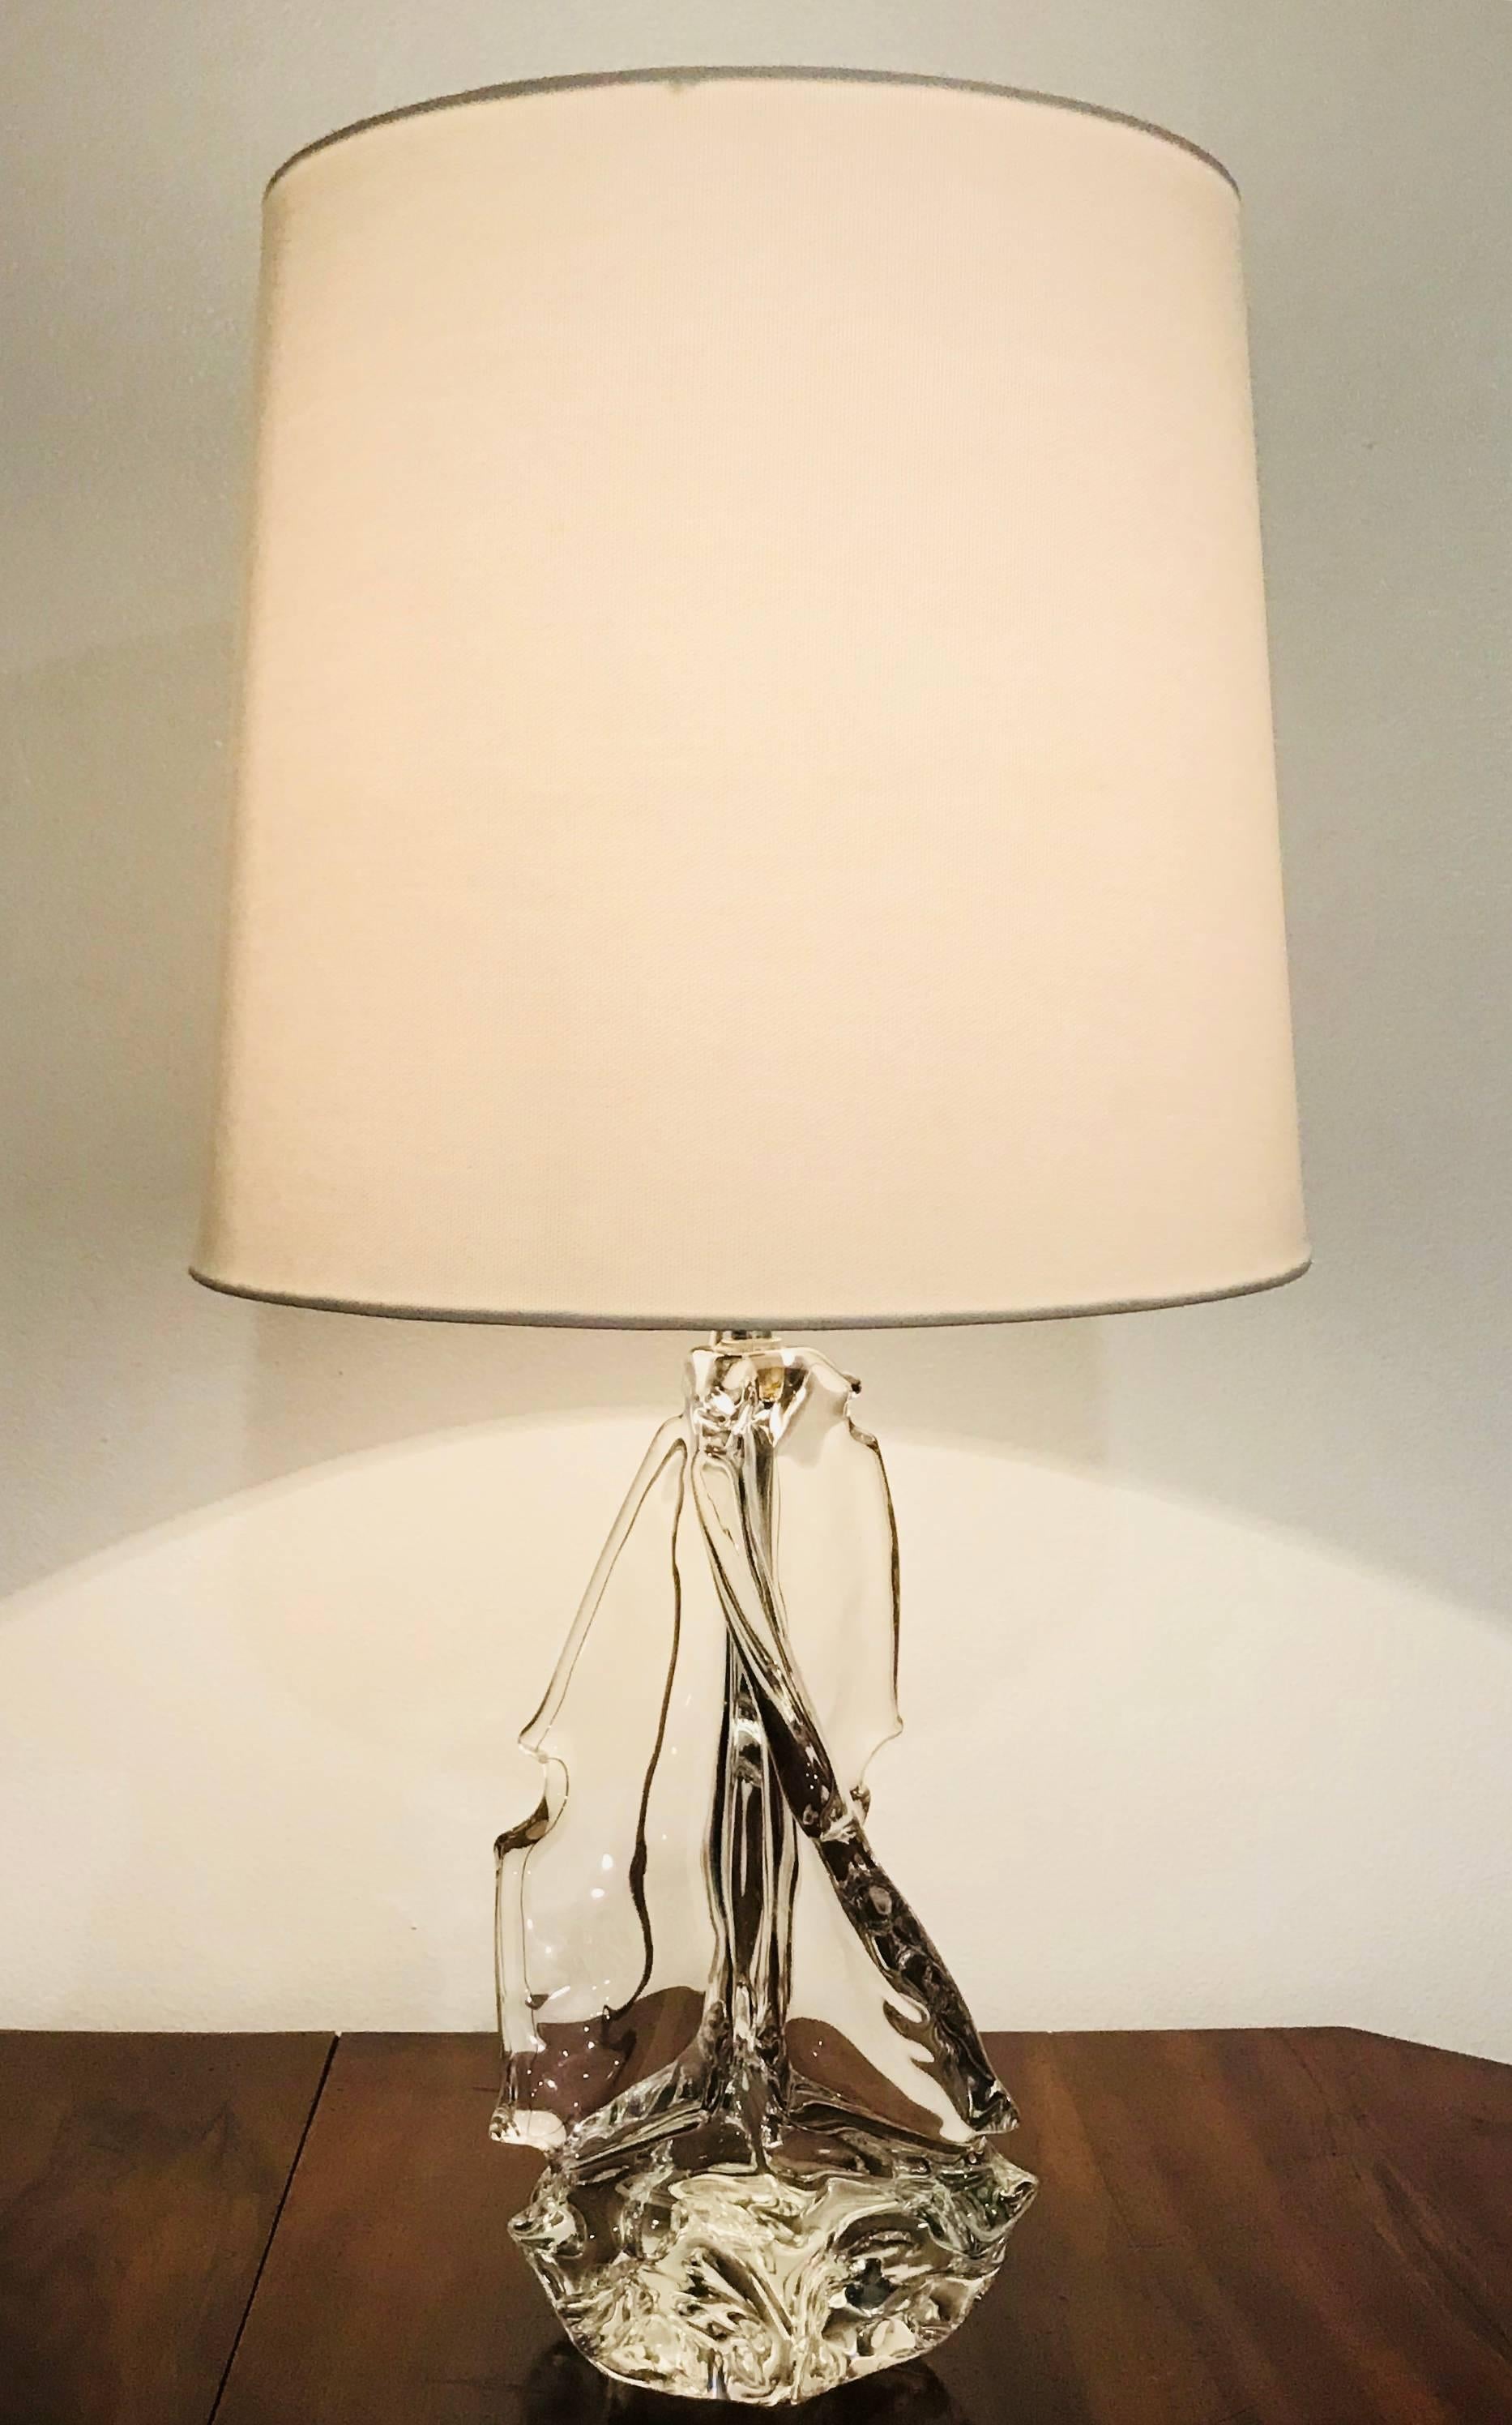 A luxurious pair of sculptural solid clear crystal table lamp by the French maker, Schneider. Signed. Newly rewired. 25” height with 12” shade shown.